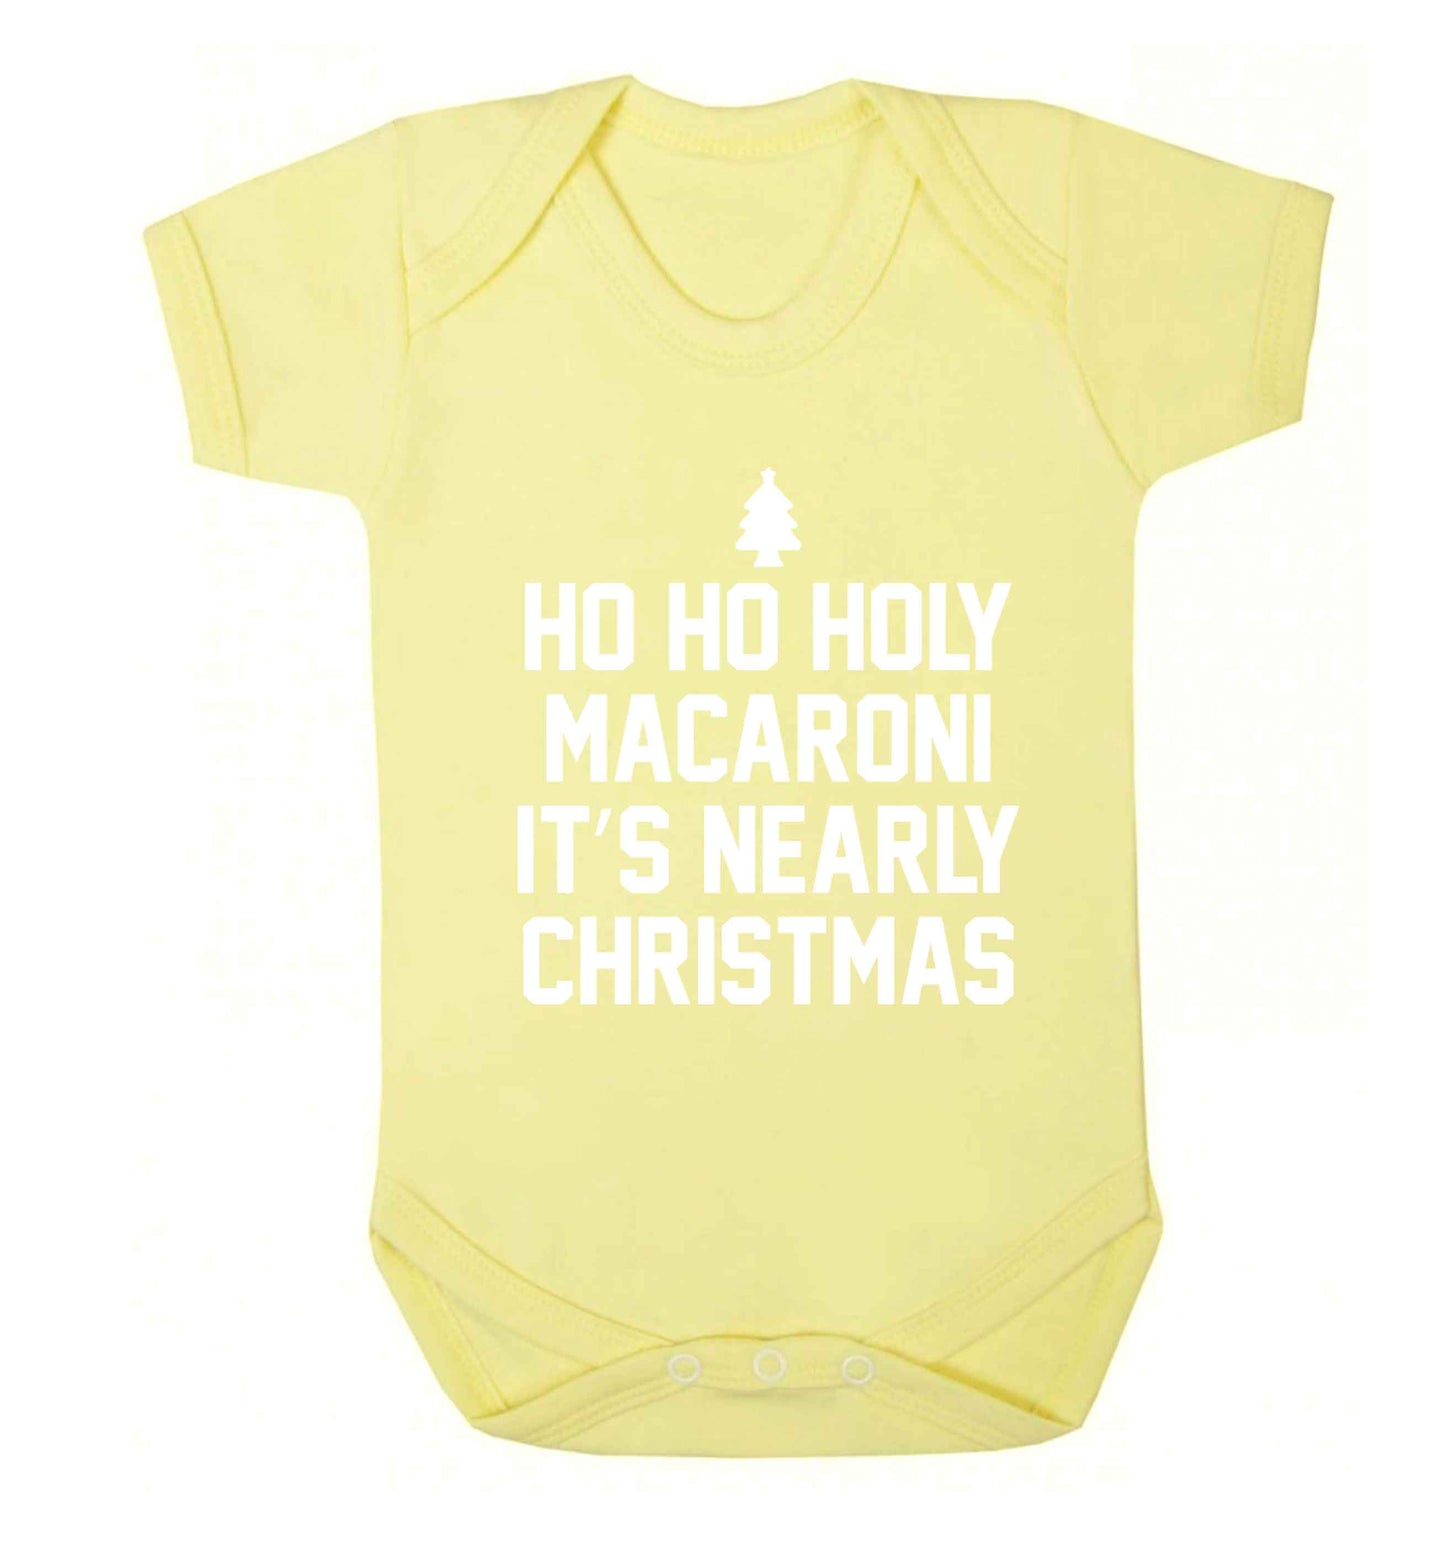 Ho ho holy macaroni it's nearly Christmas Baby Vest pale yellow 18-24 months